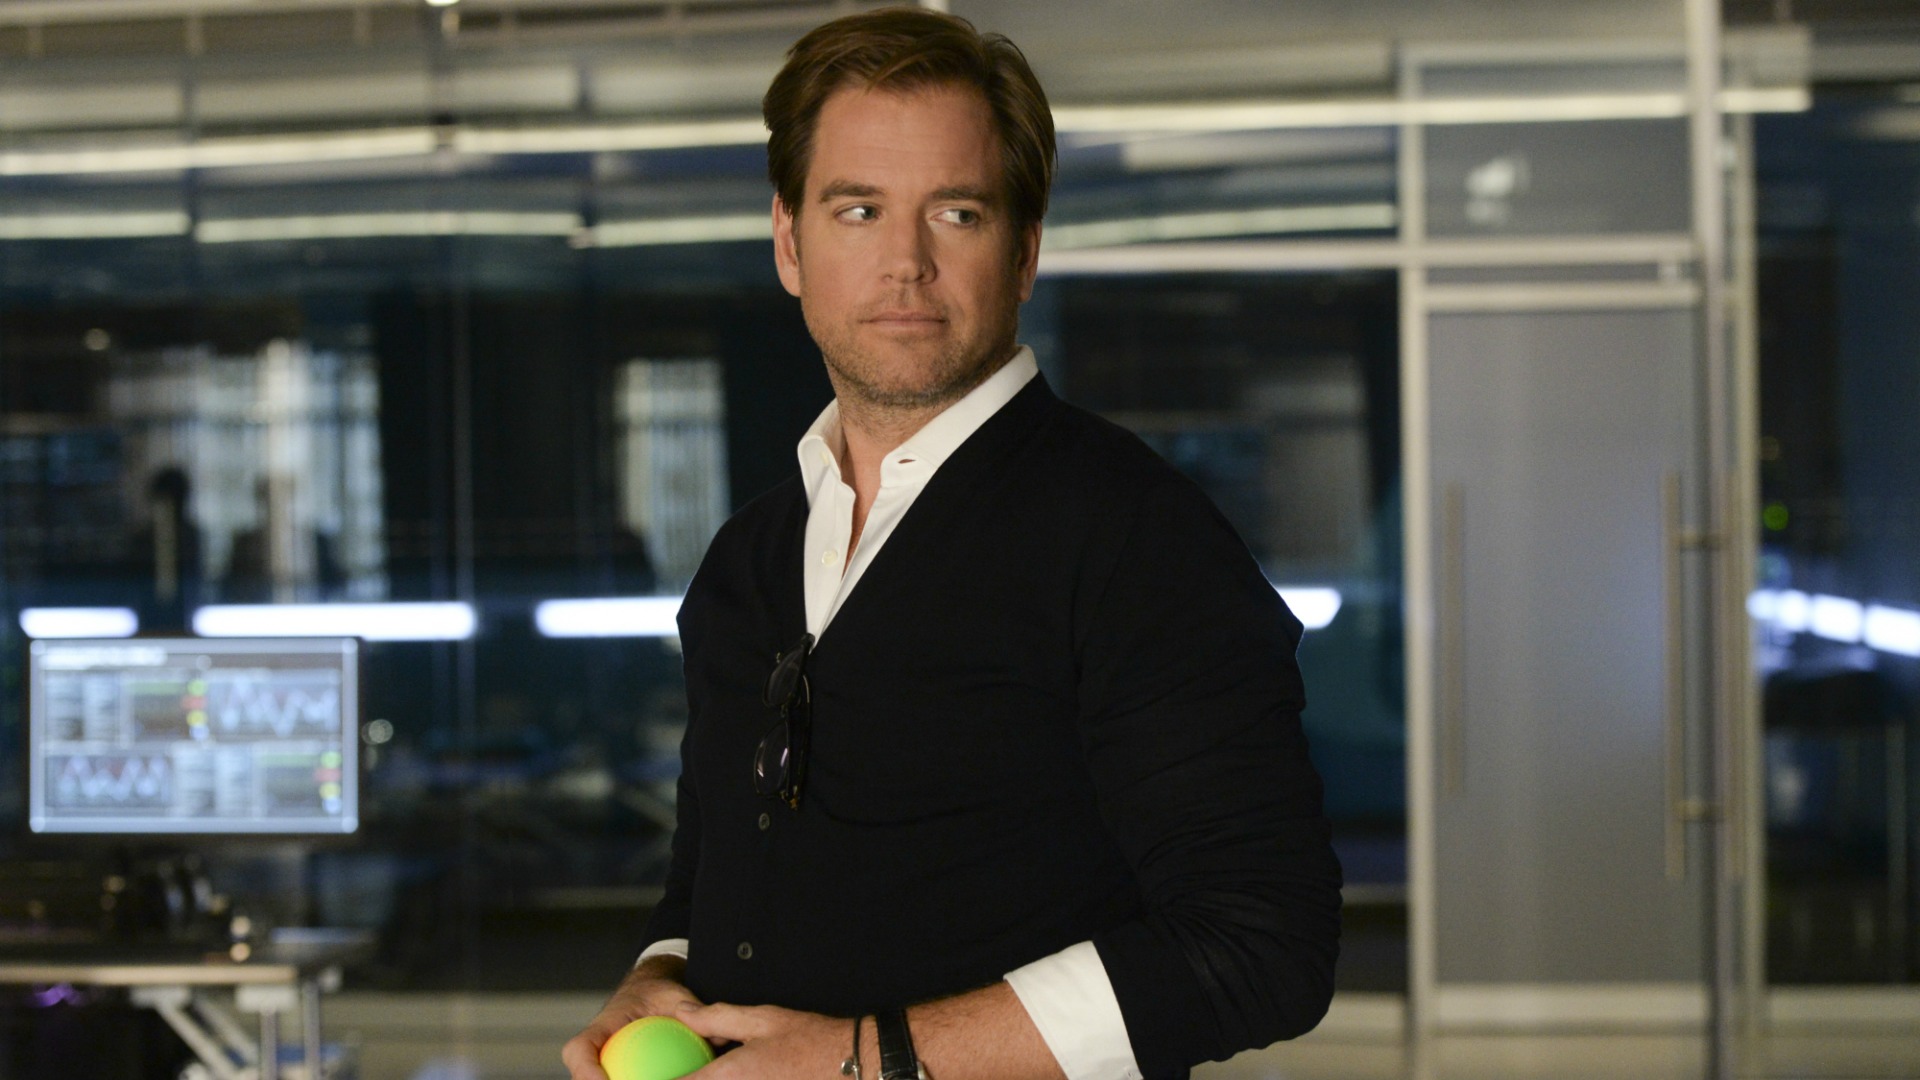 Bull Is Driven To Save His Client - Bull Photos - CBS.com1920 x 1080